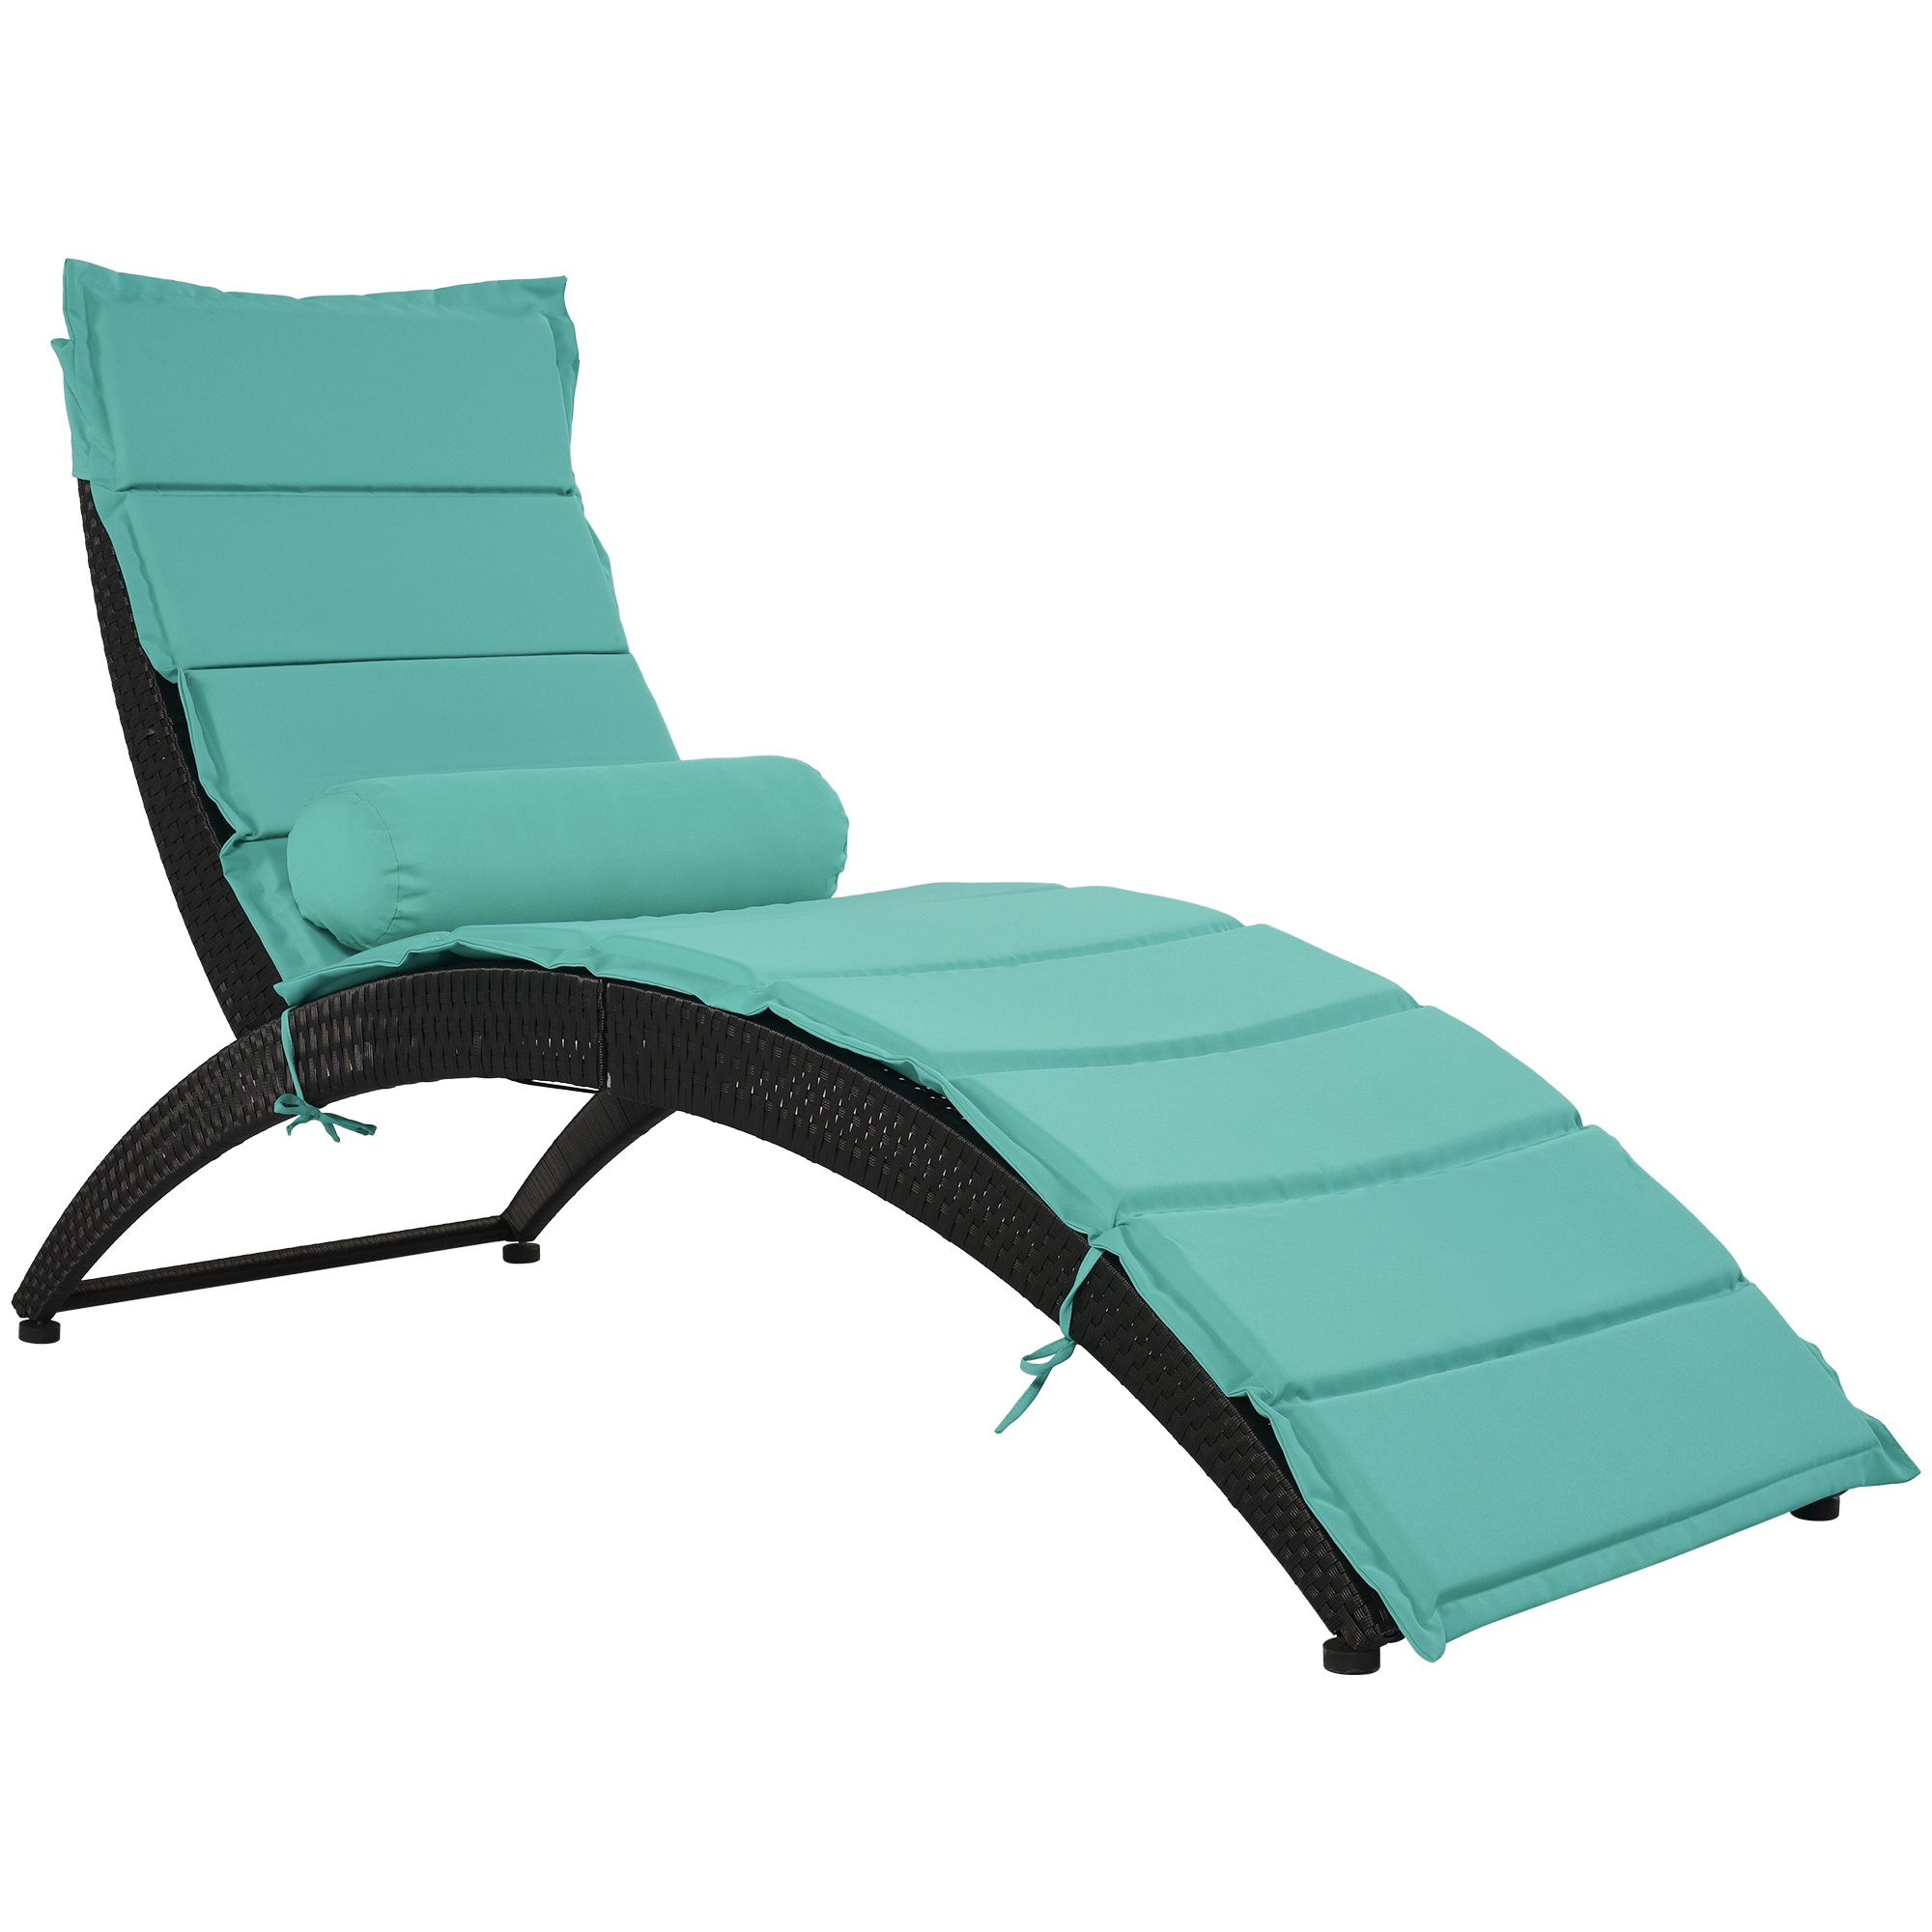 BTMWAY Outdoor Wicker Chaise Lounge, All-Weather Rattan Lounge Chair with Cushion and Head Pillow, Patio Furniture Sun Lounger Foldable Chaise Lounger, Folding Sunbed Tanning Recliner for Beach Pool - image 4 of 11